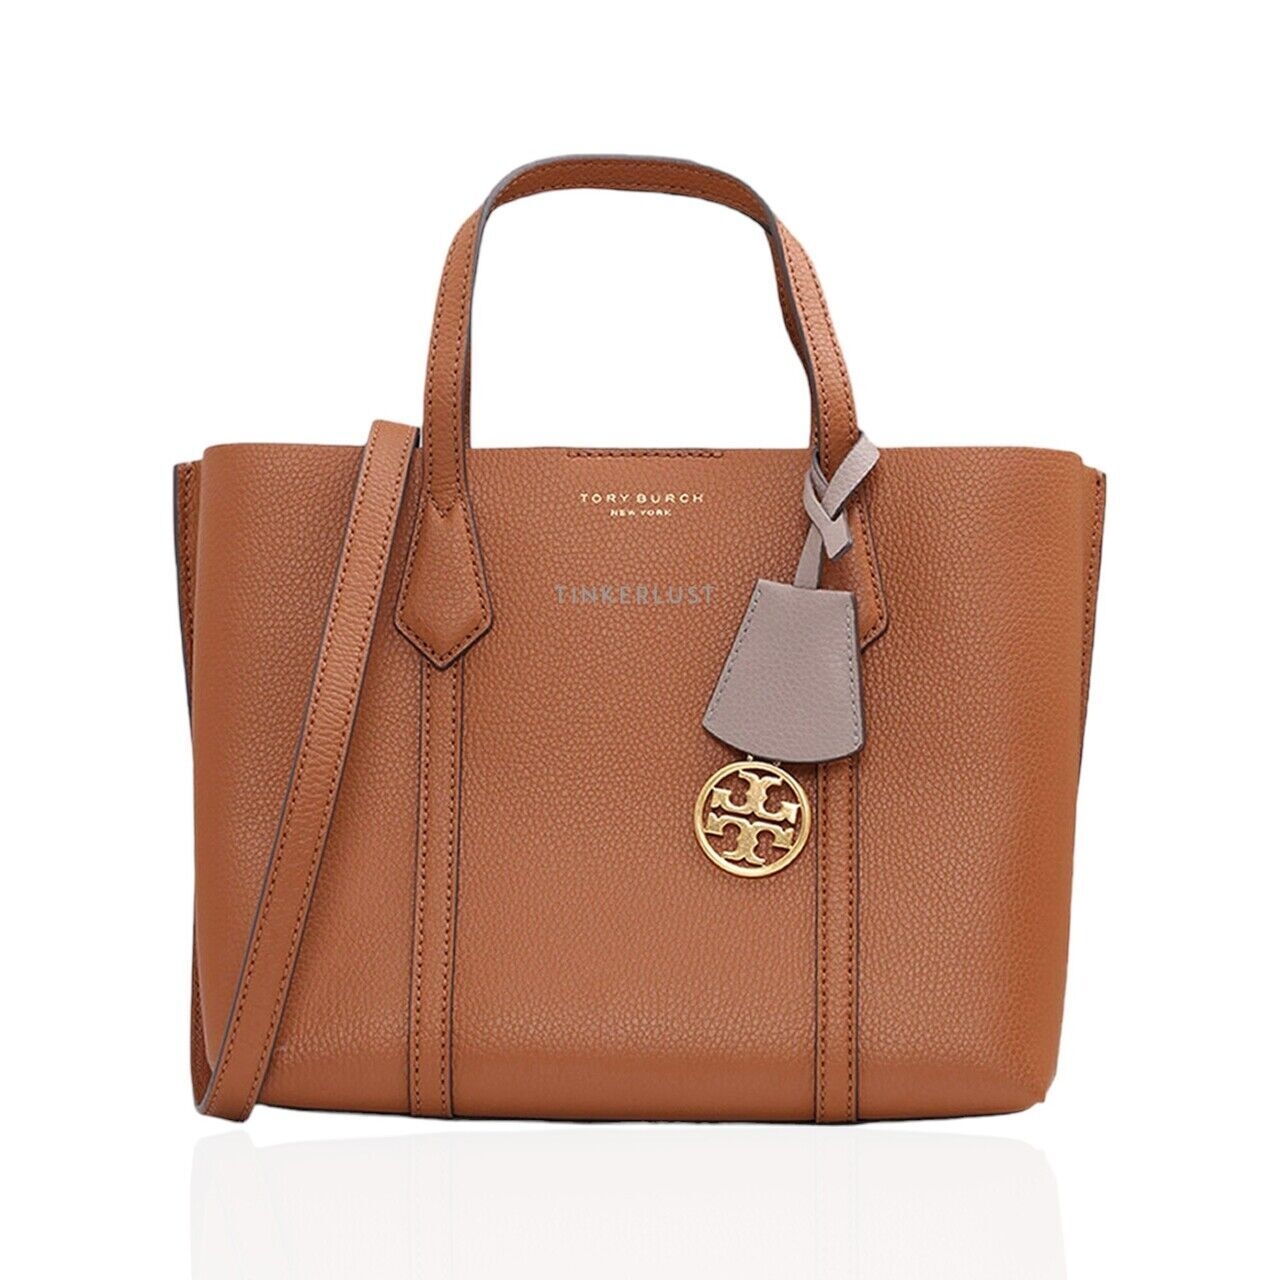 Tory Burch Small Perry Color Block Triple Compartment in Light Umber Multicolors Satchel Bag